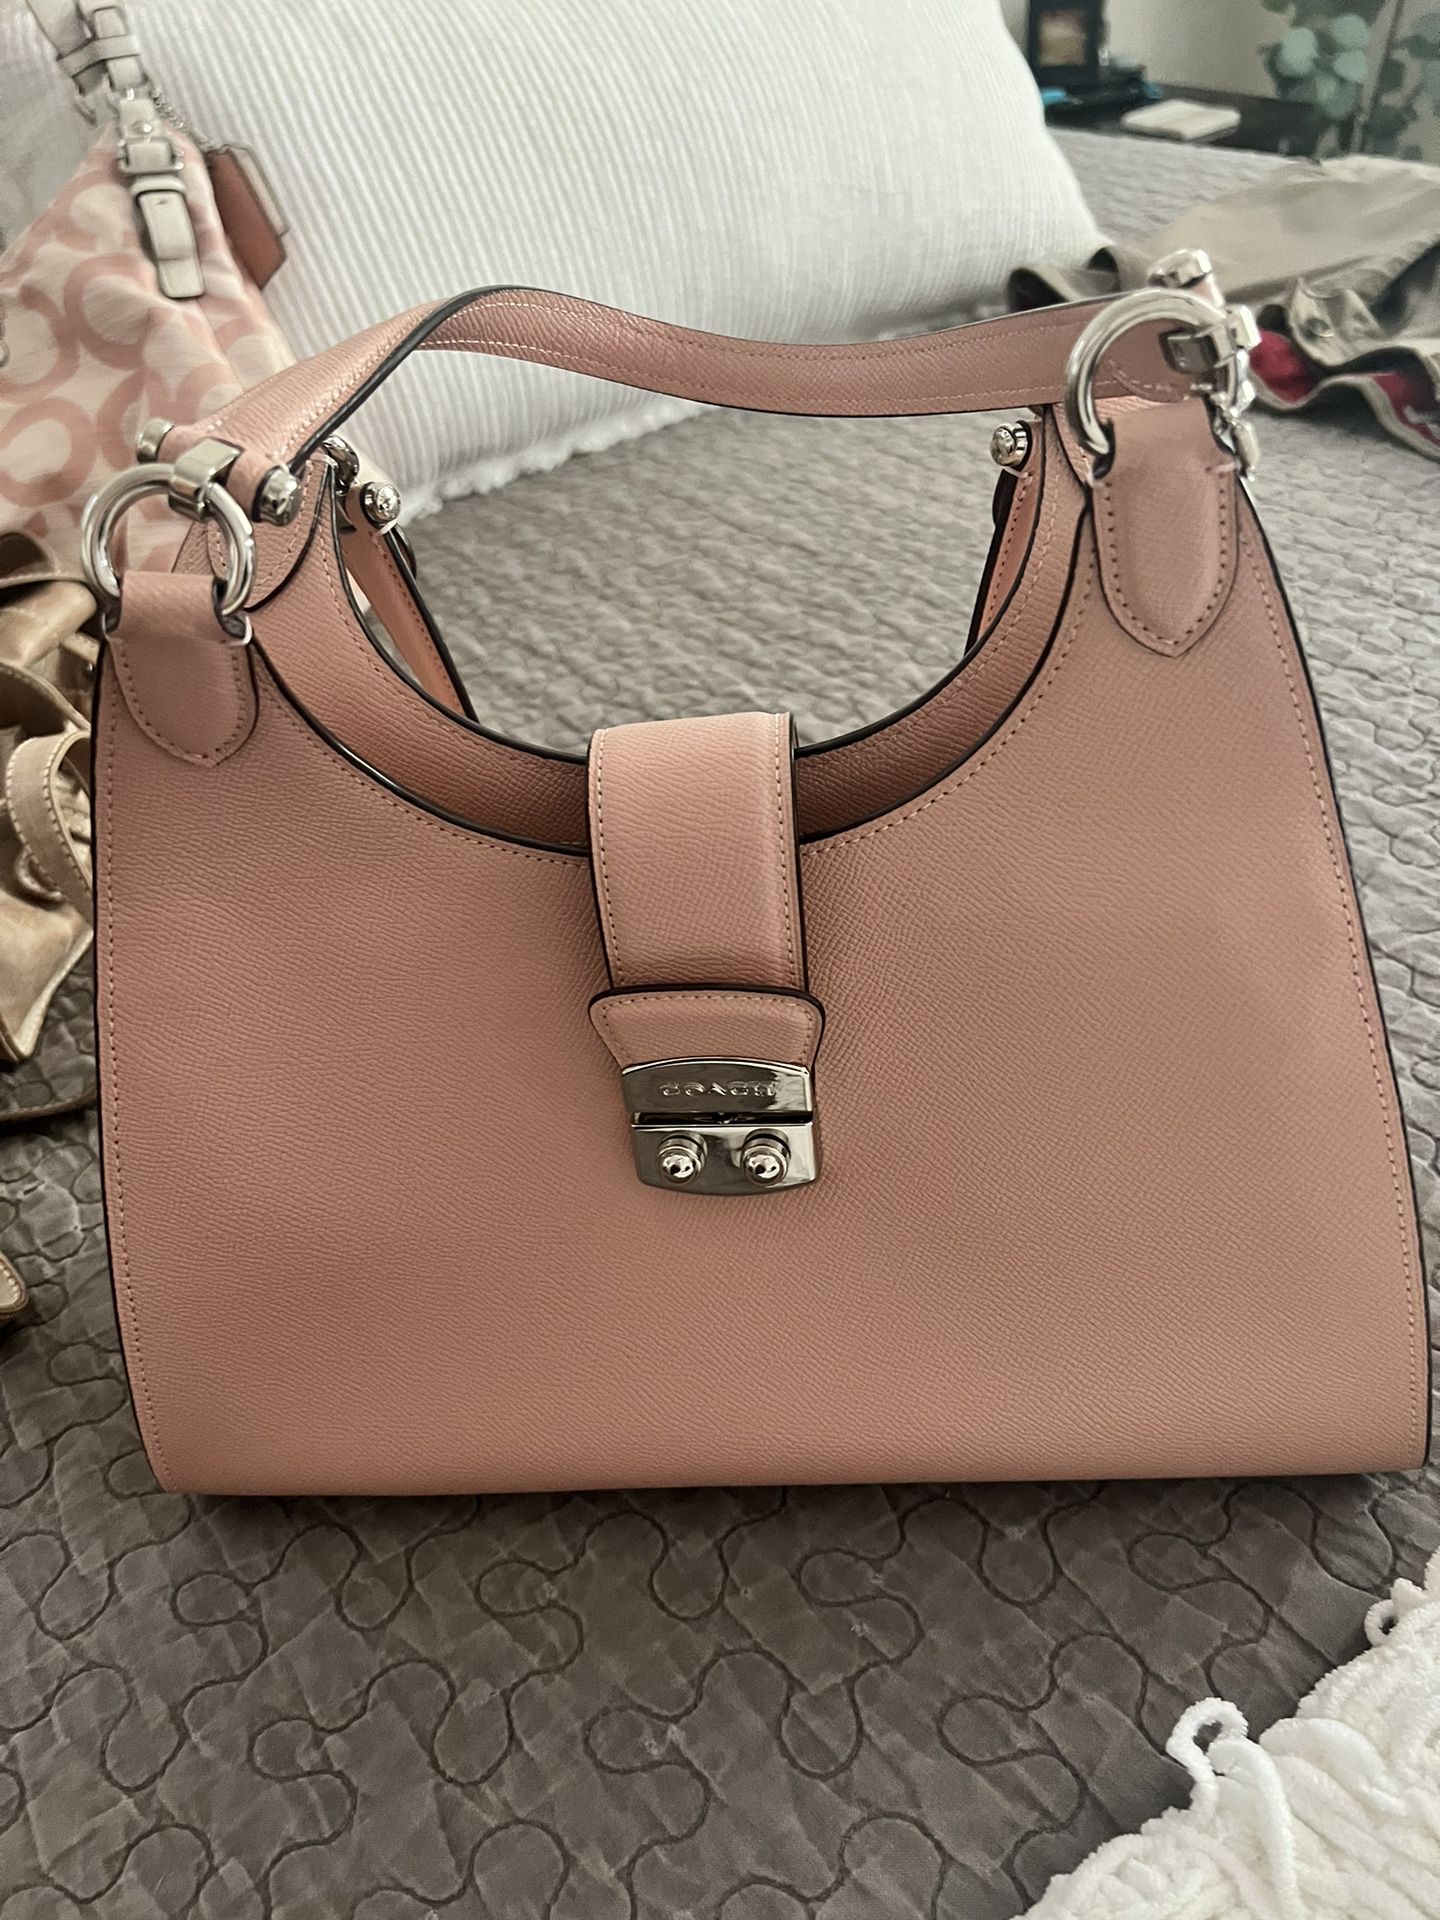 Coach Pink Handbag New Without Tags